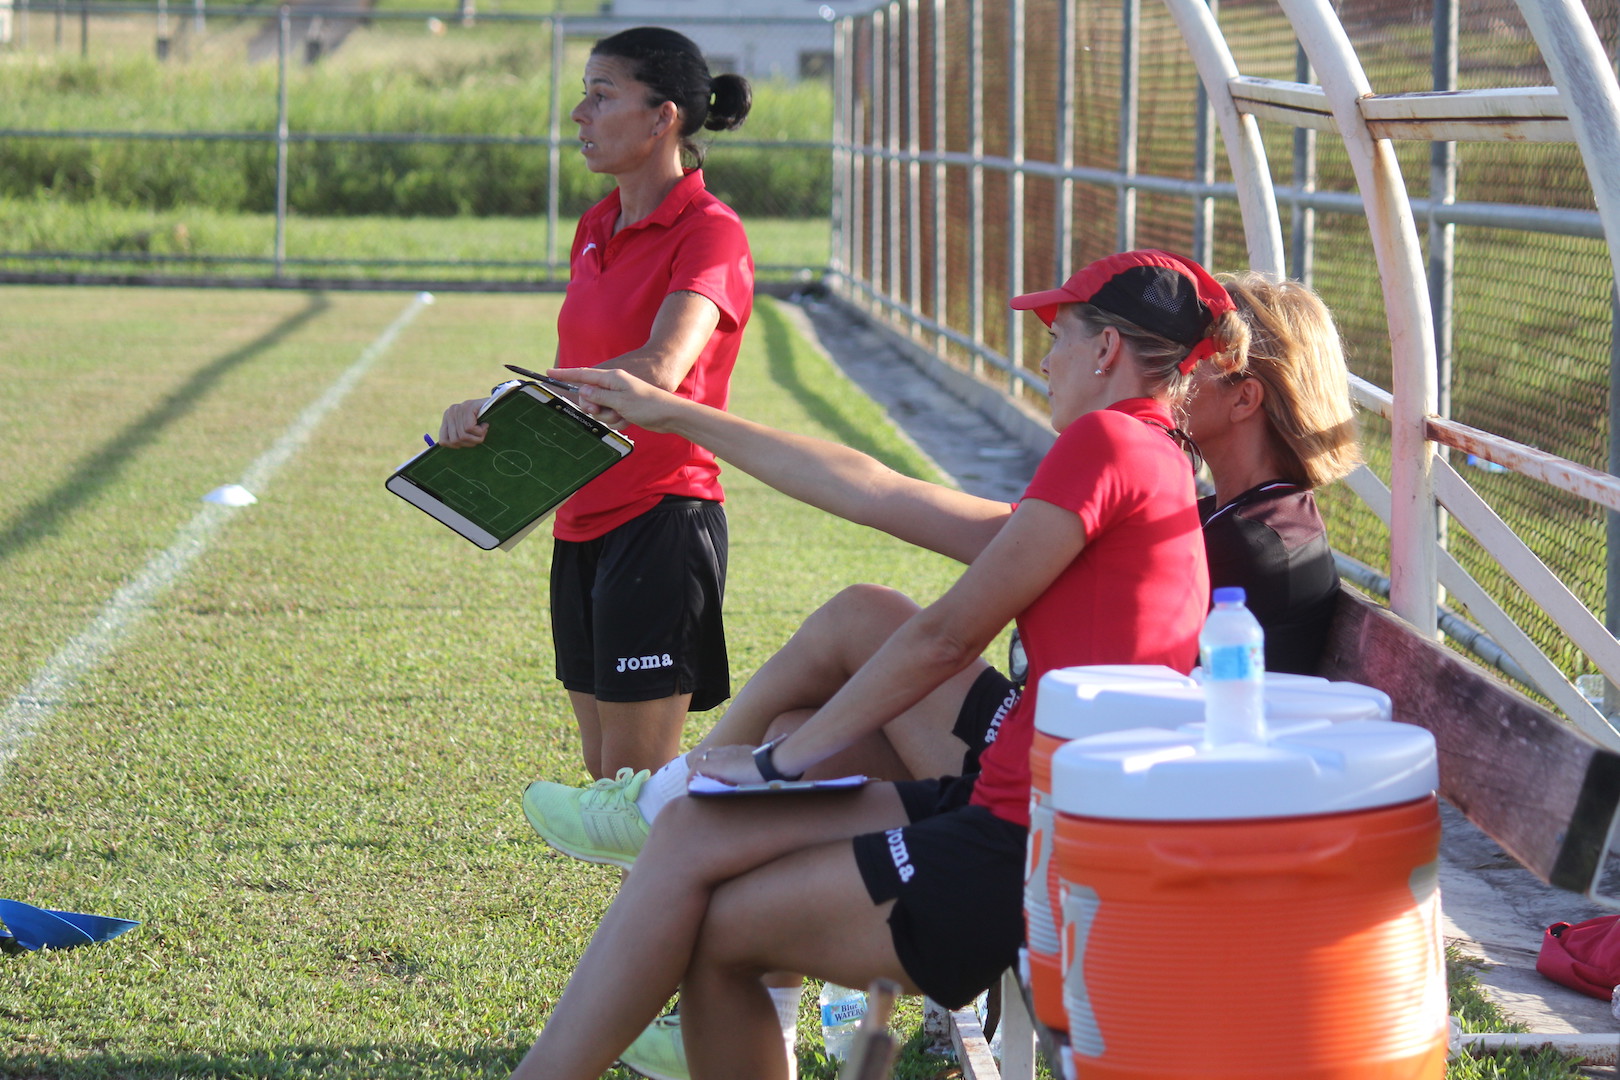 Nicola Williams points out an observation to Carolina Morace and Manuela Tesse during U-17 trials on Saturday.